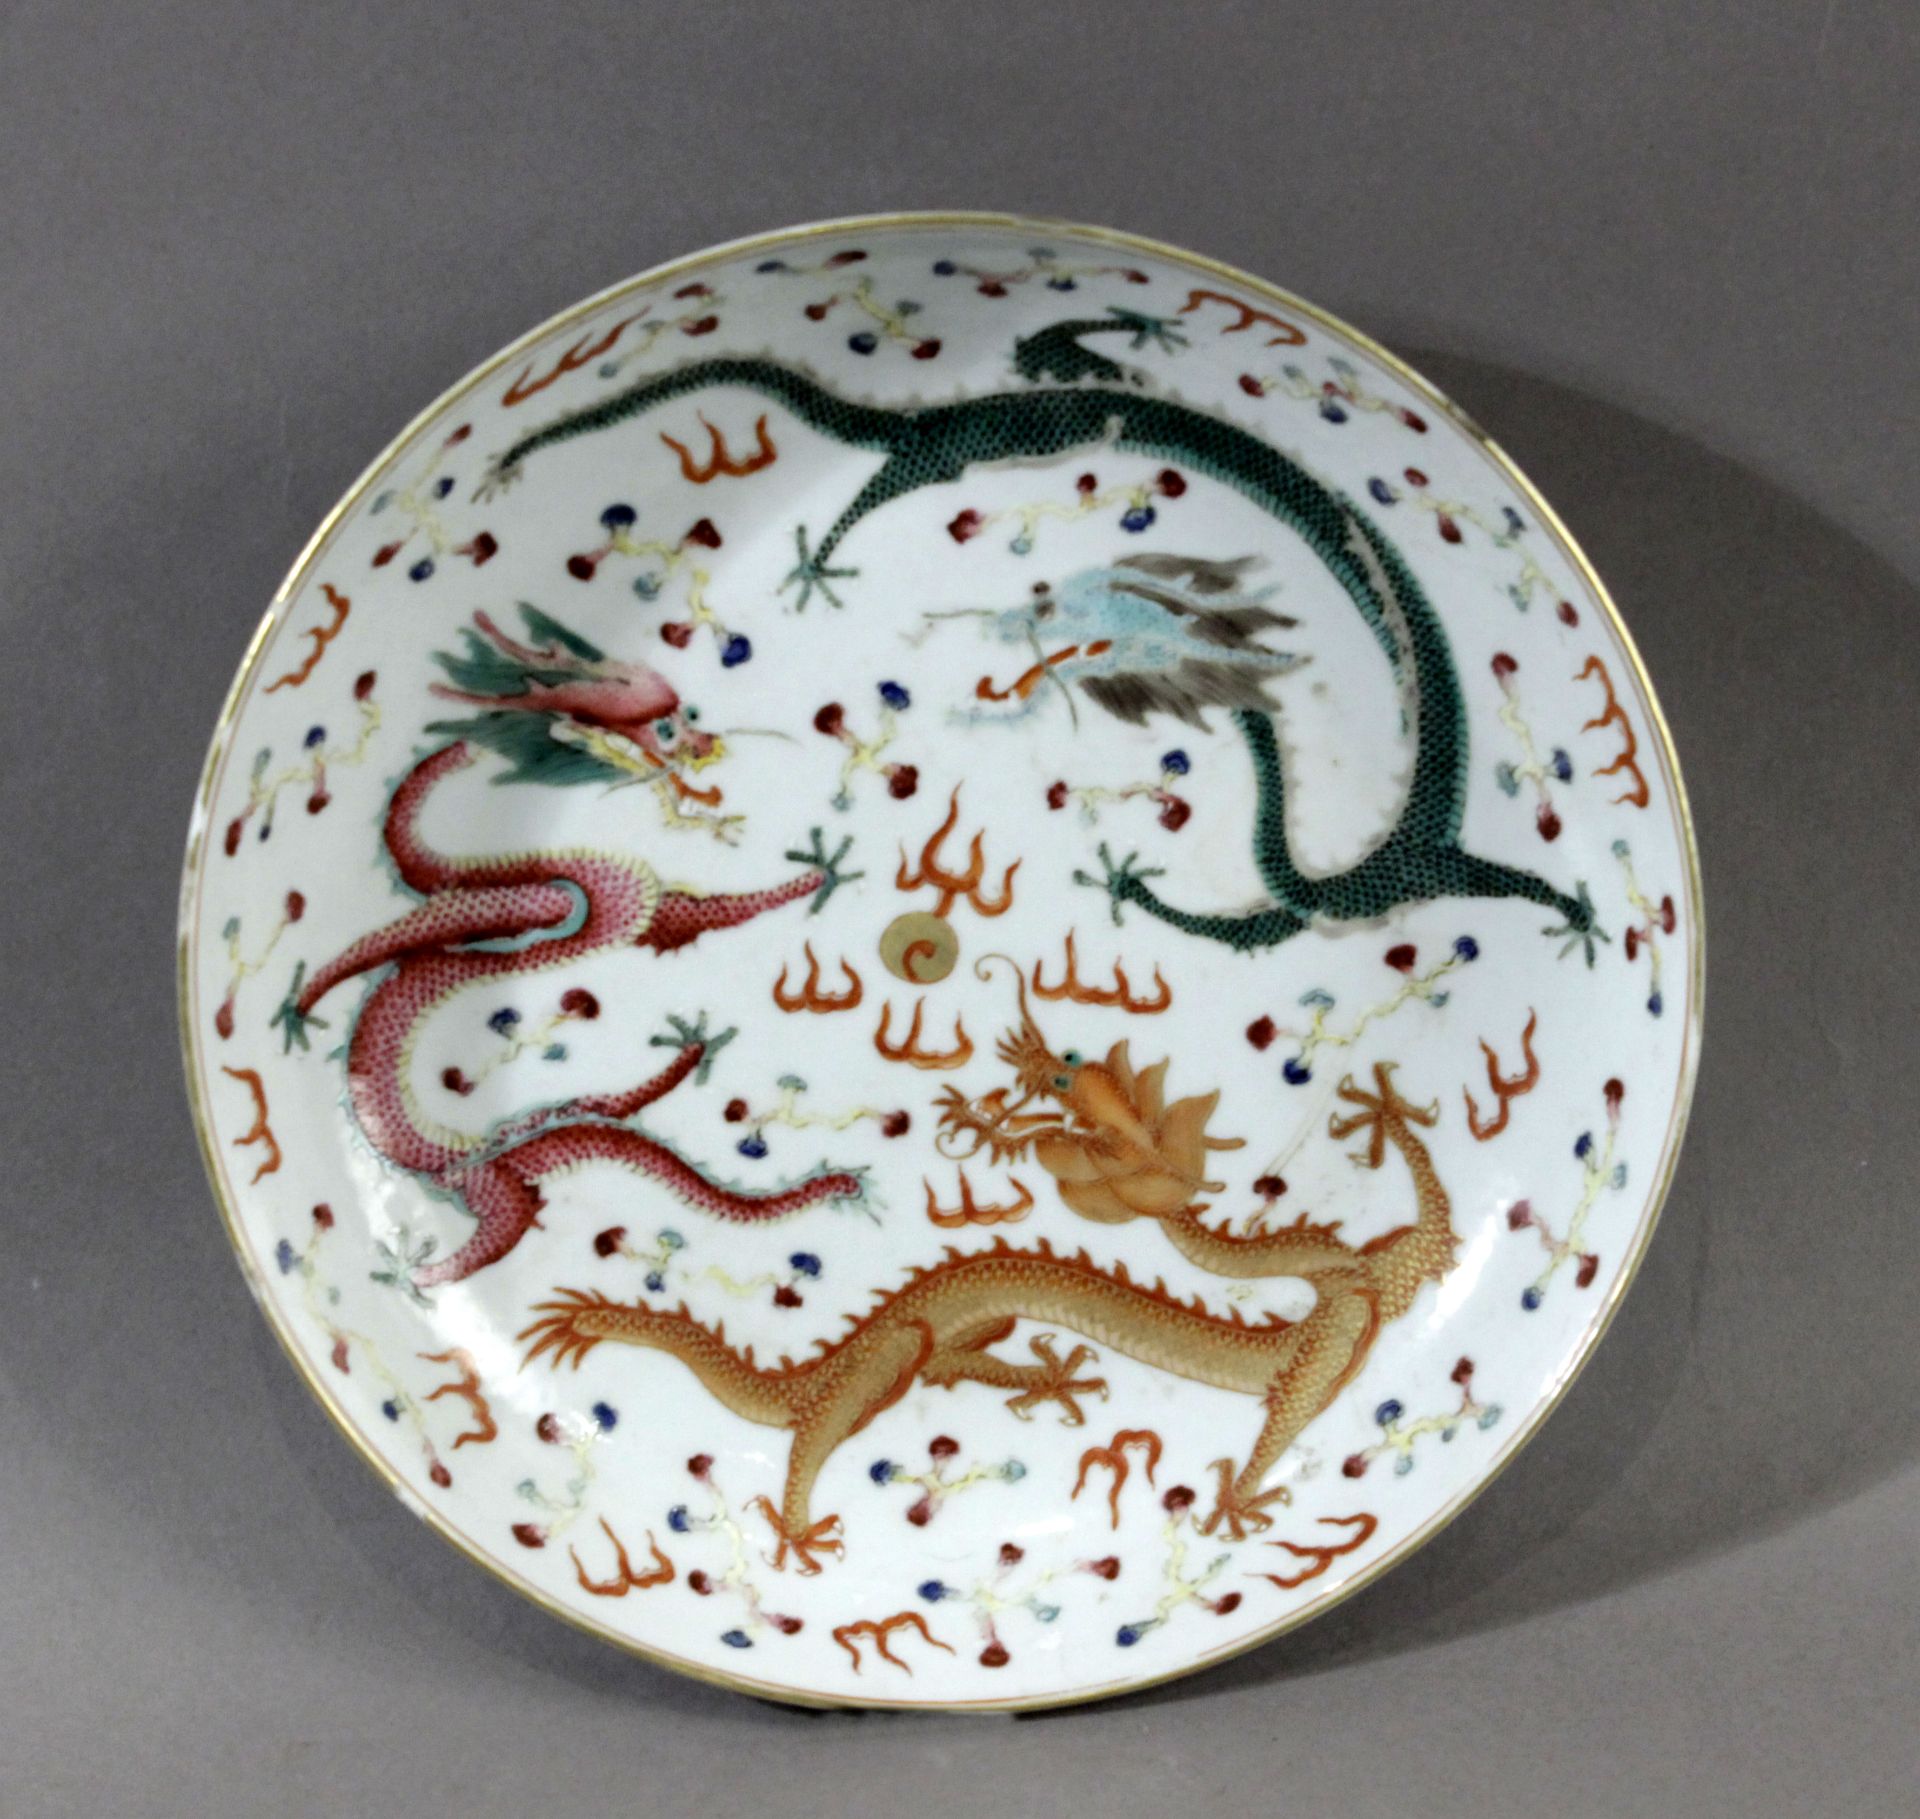 An early 20th century Chinese dish in polychromed porcelain